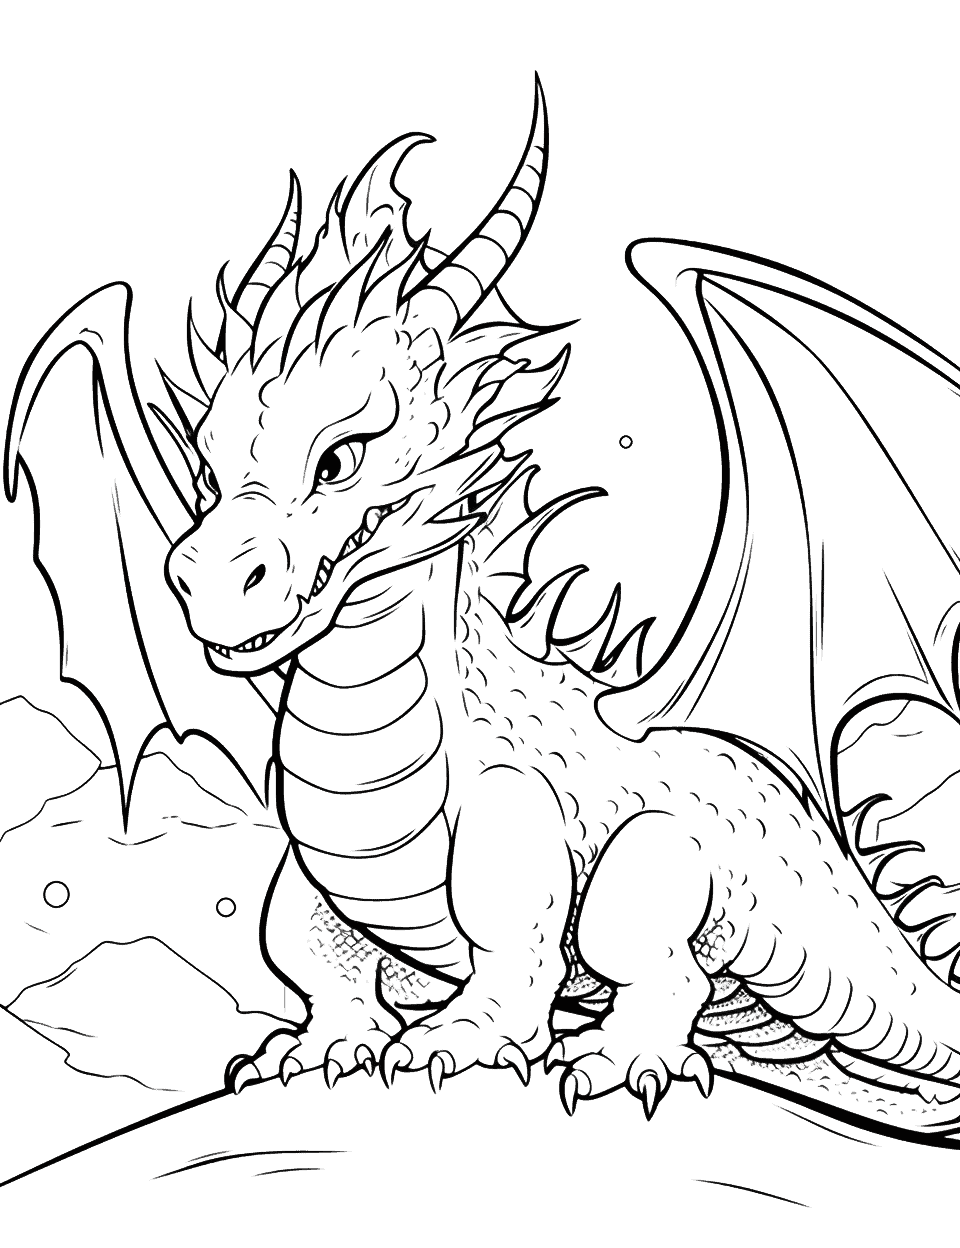 Ice Dragon in the Snow Coloring Page - An ice dragon camouflaged in a snow-covered landscape.